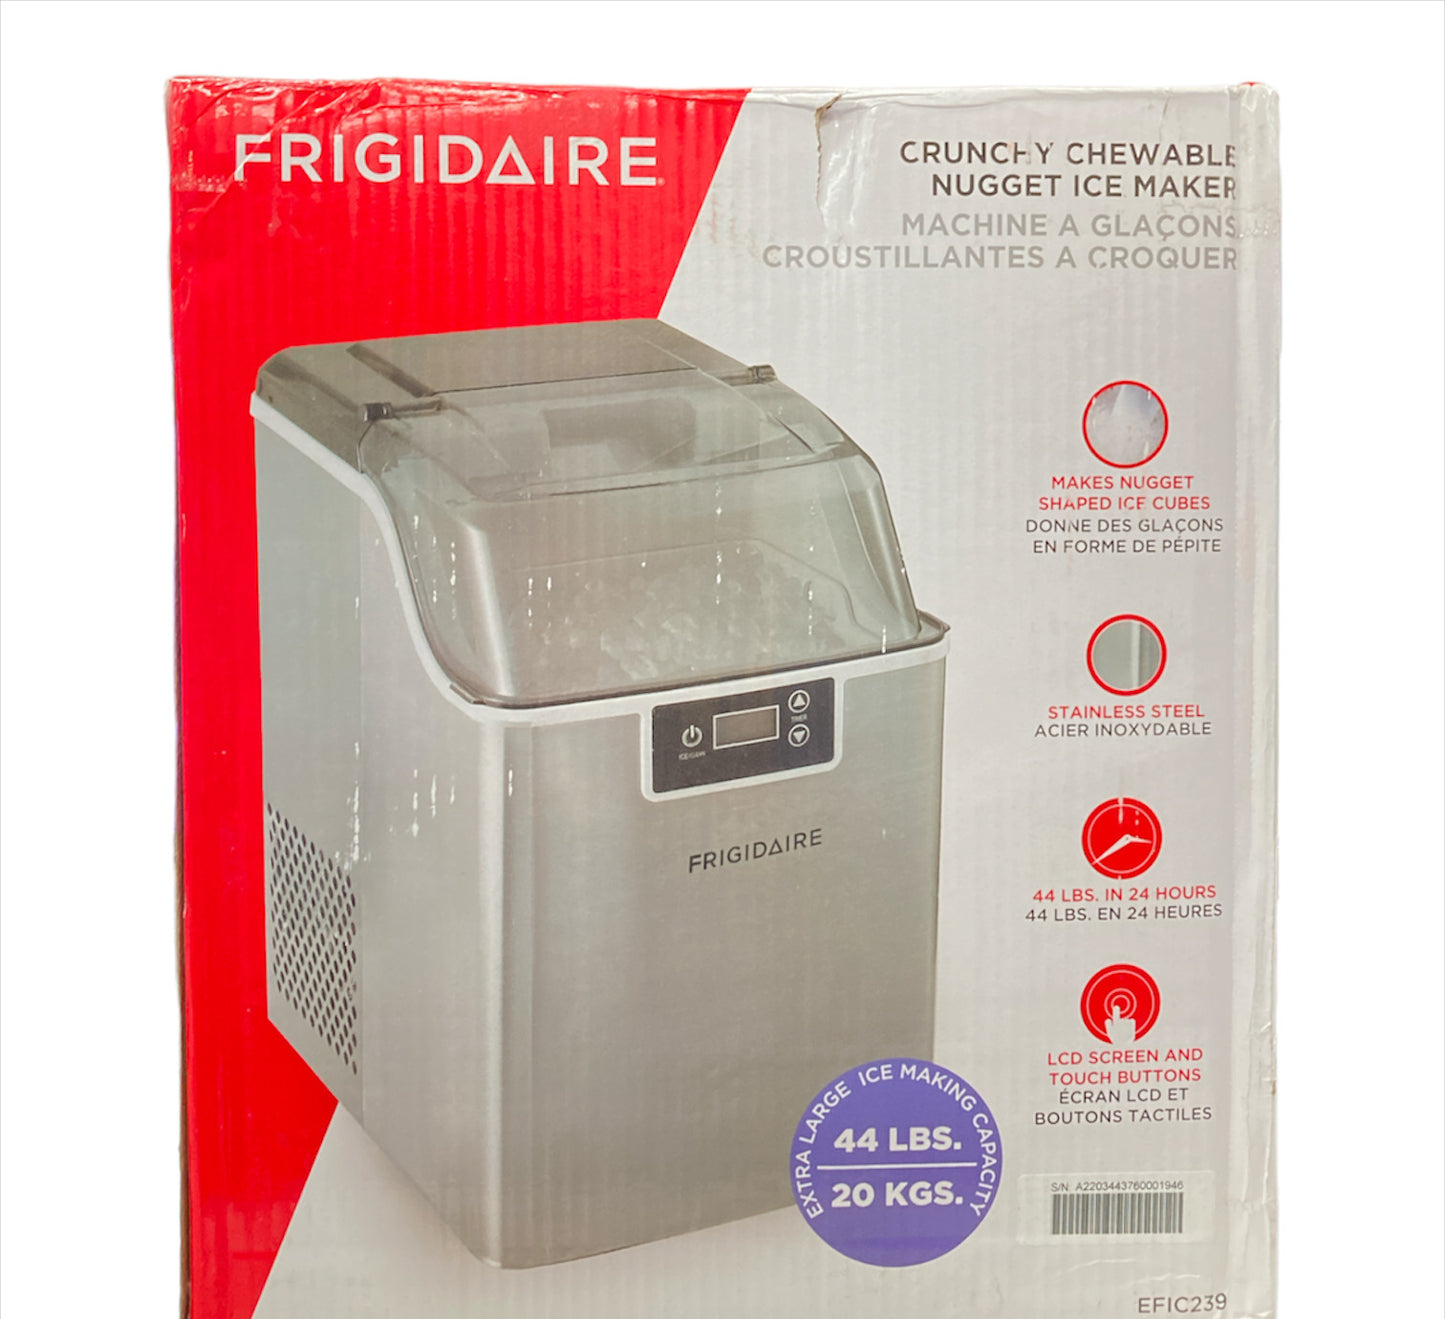 Frigidaire 44 lbs Chewable Nugget Ice Maker Stainless Steel